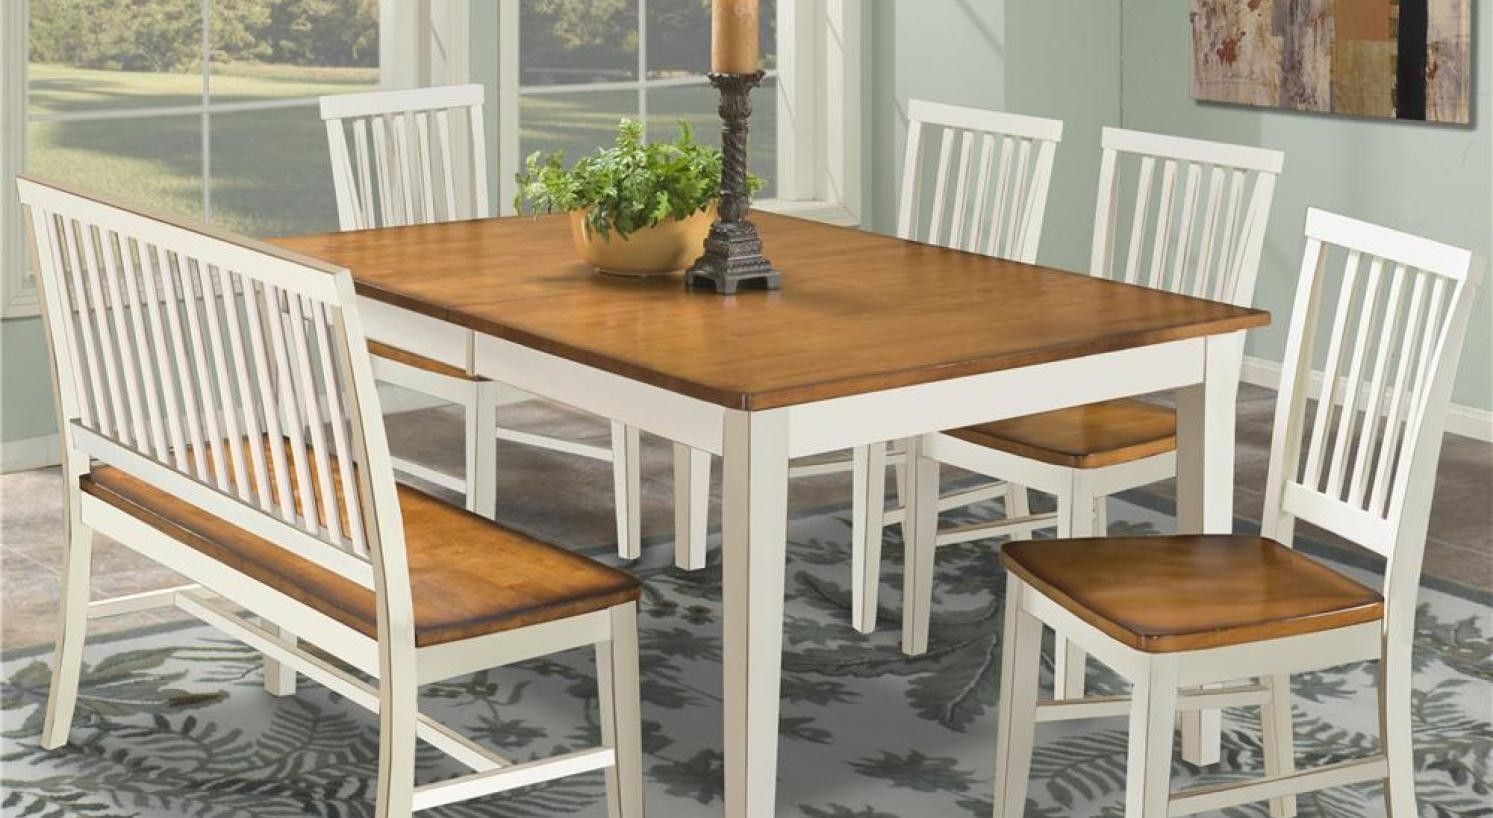 Dining Table With Bench Visualhunt, Farmhouse Dining Room Table With Bench And Chairs